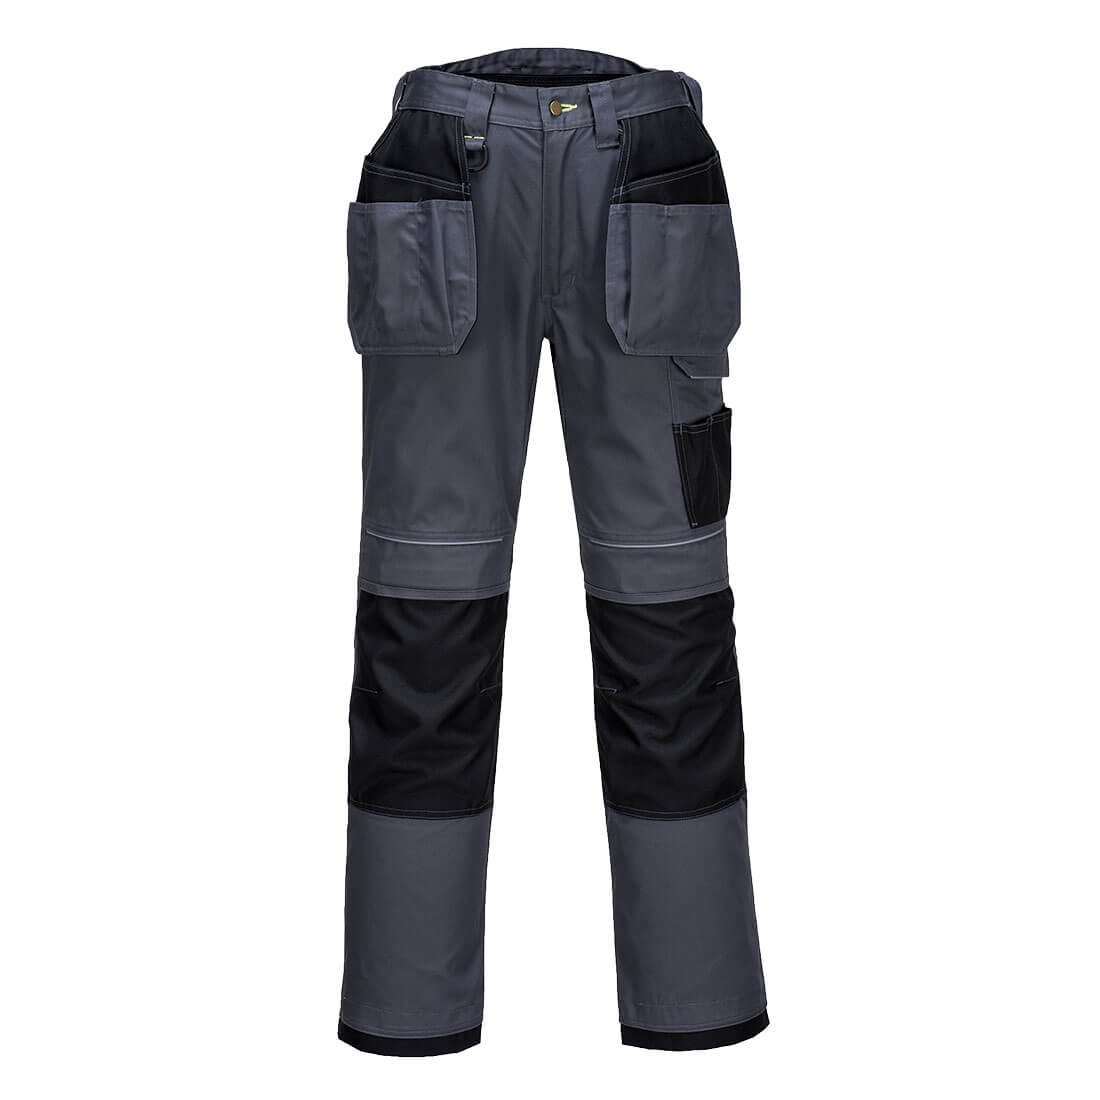 Photo of Pw3 Mens Urban Holster Work Trousers Grey / Black 40